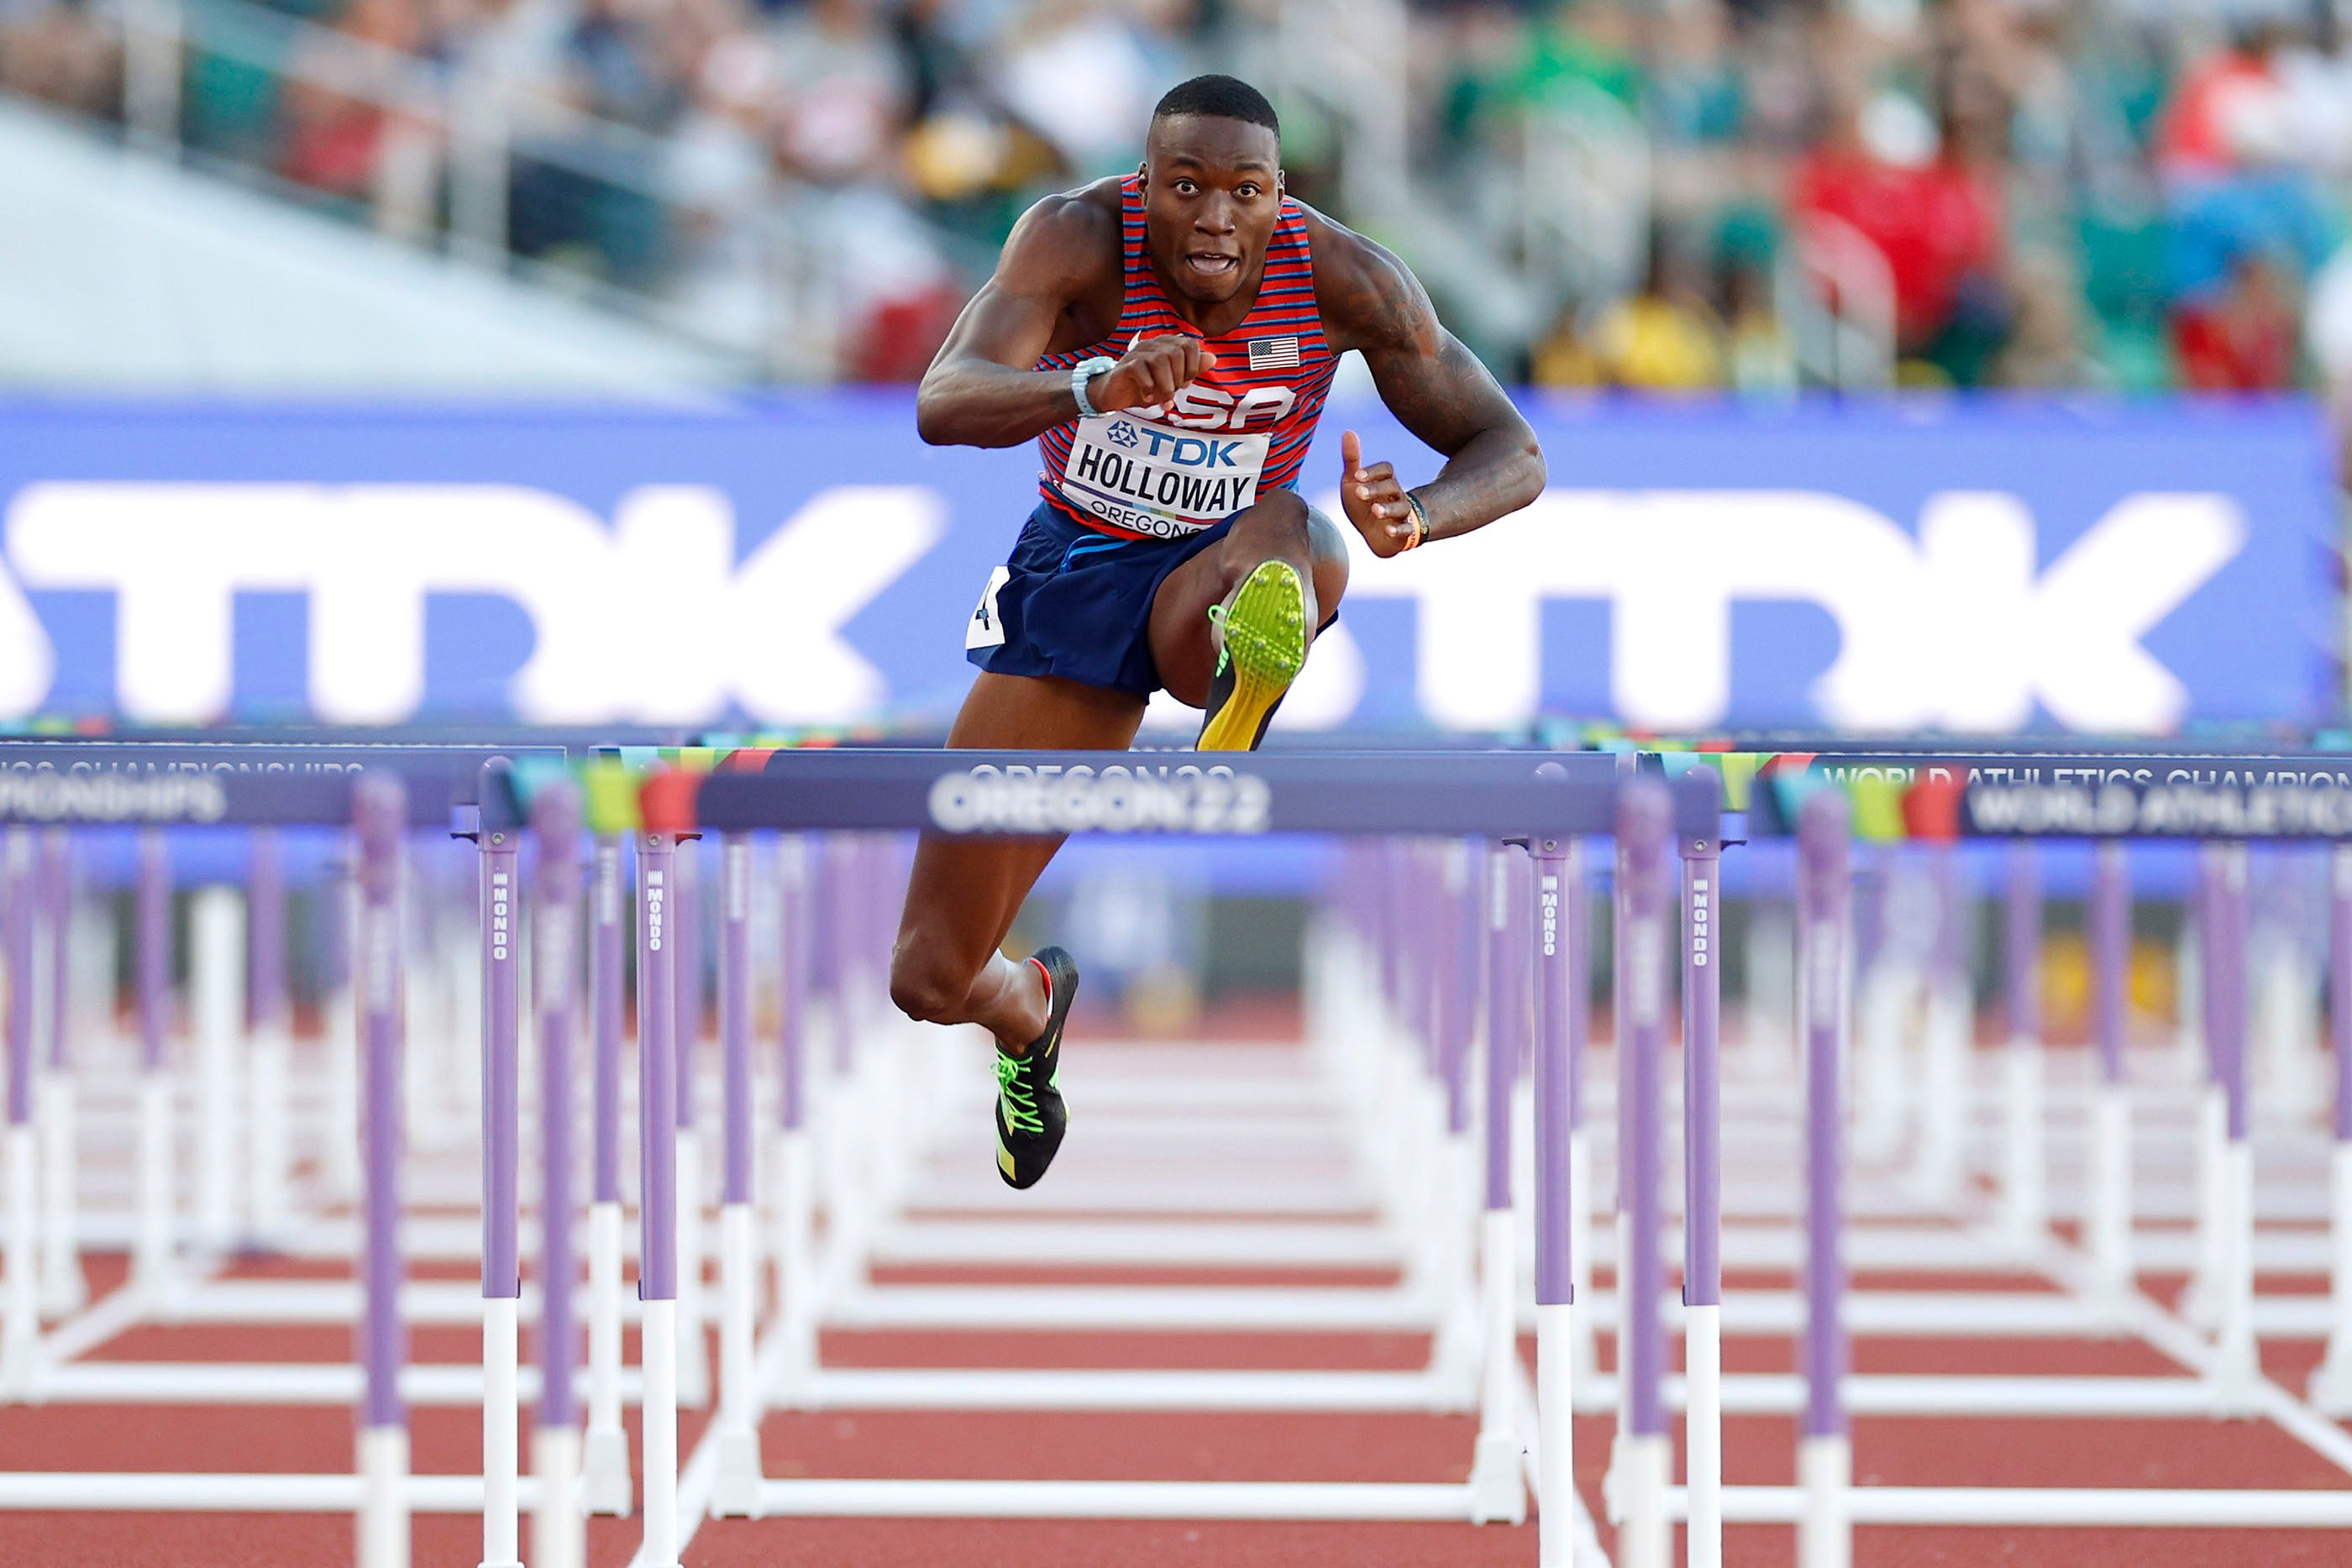 Grant Holloway on his way to the 110m hurdles title at the World Athletics Championships Oregon22